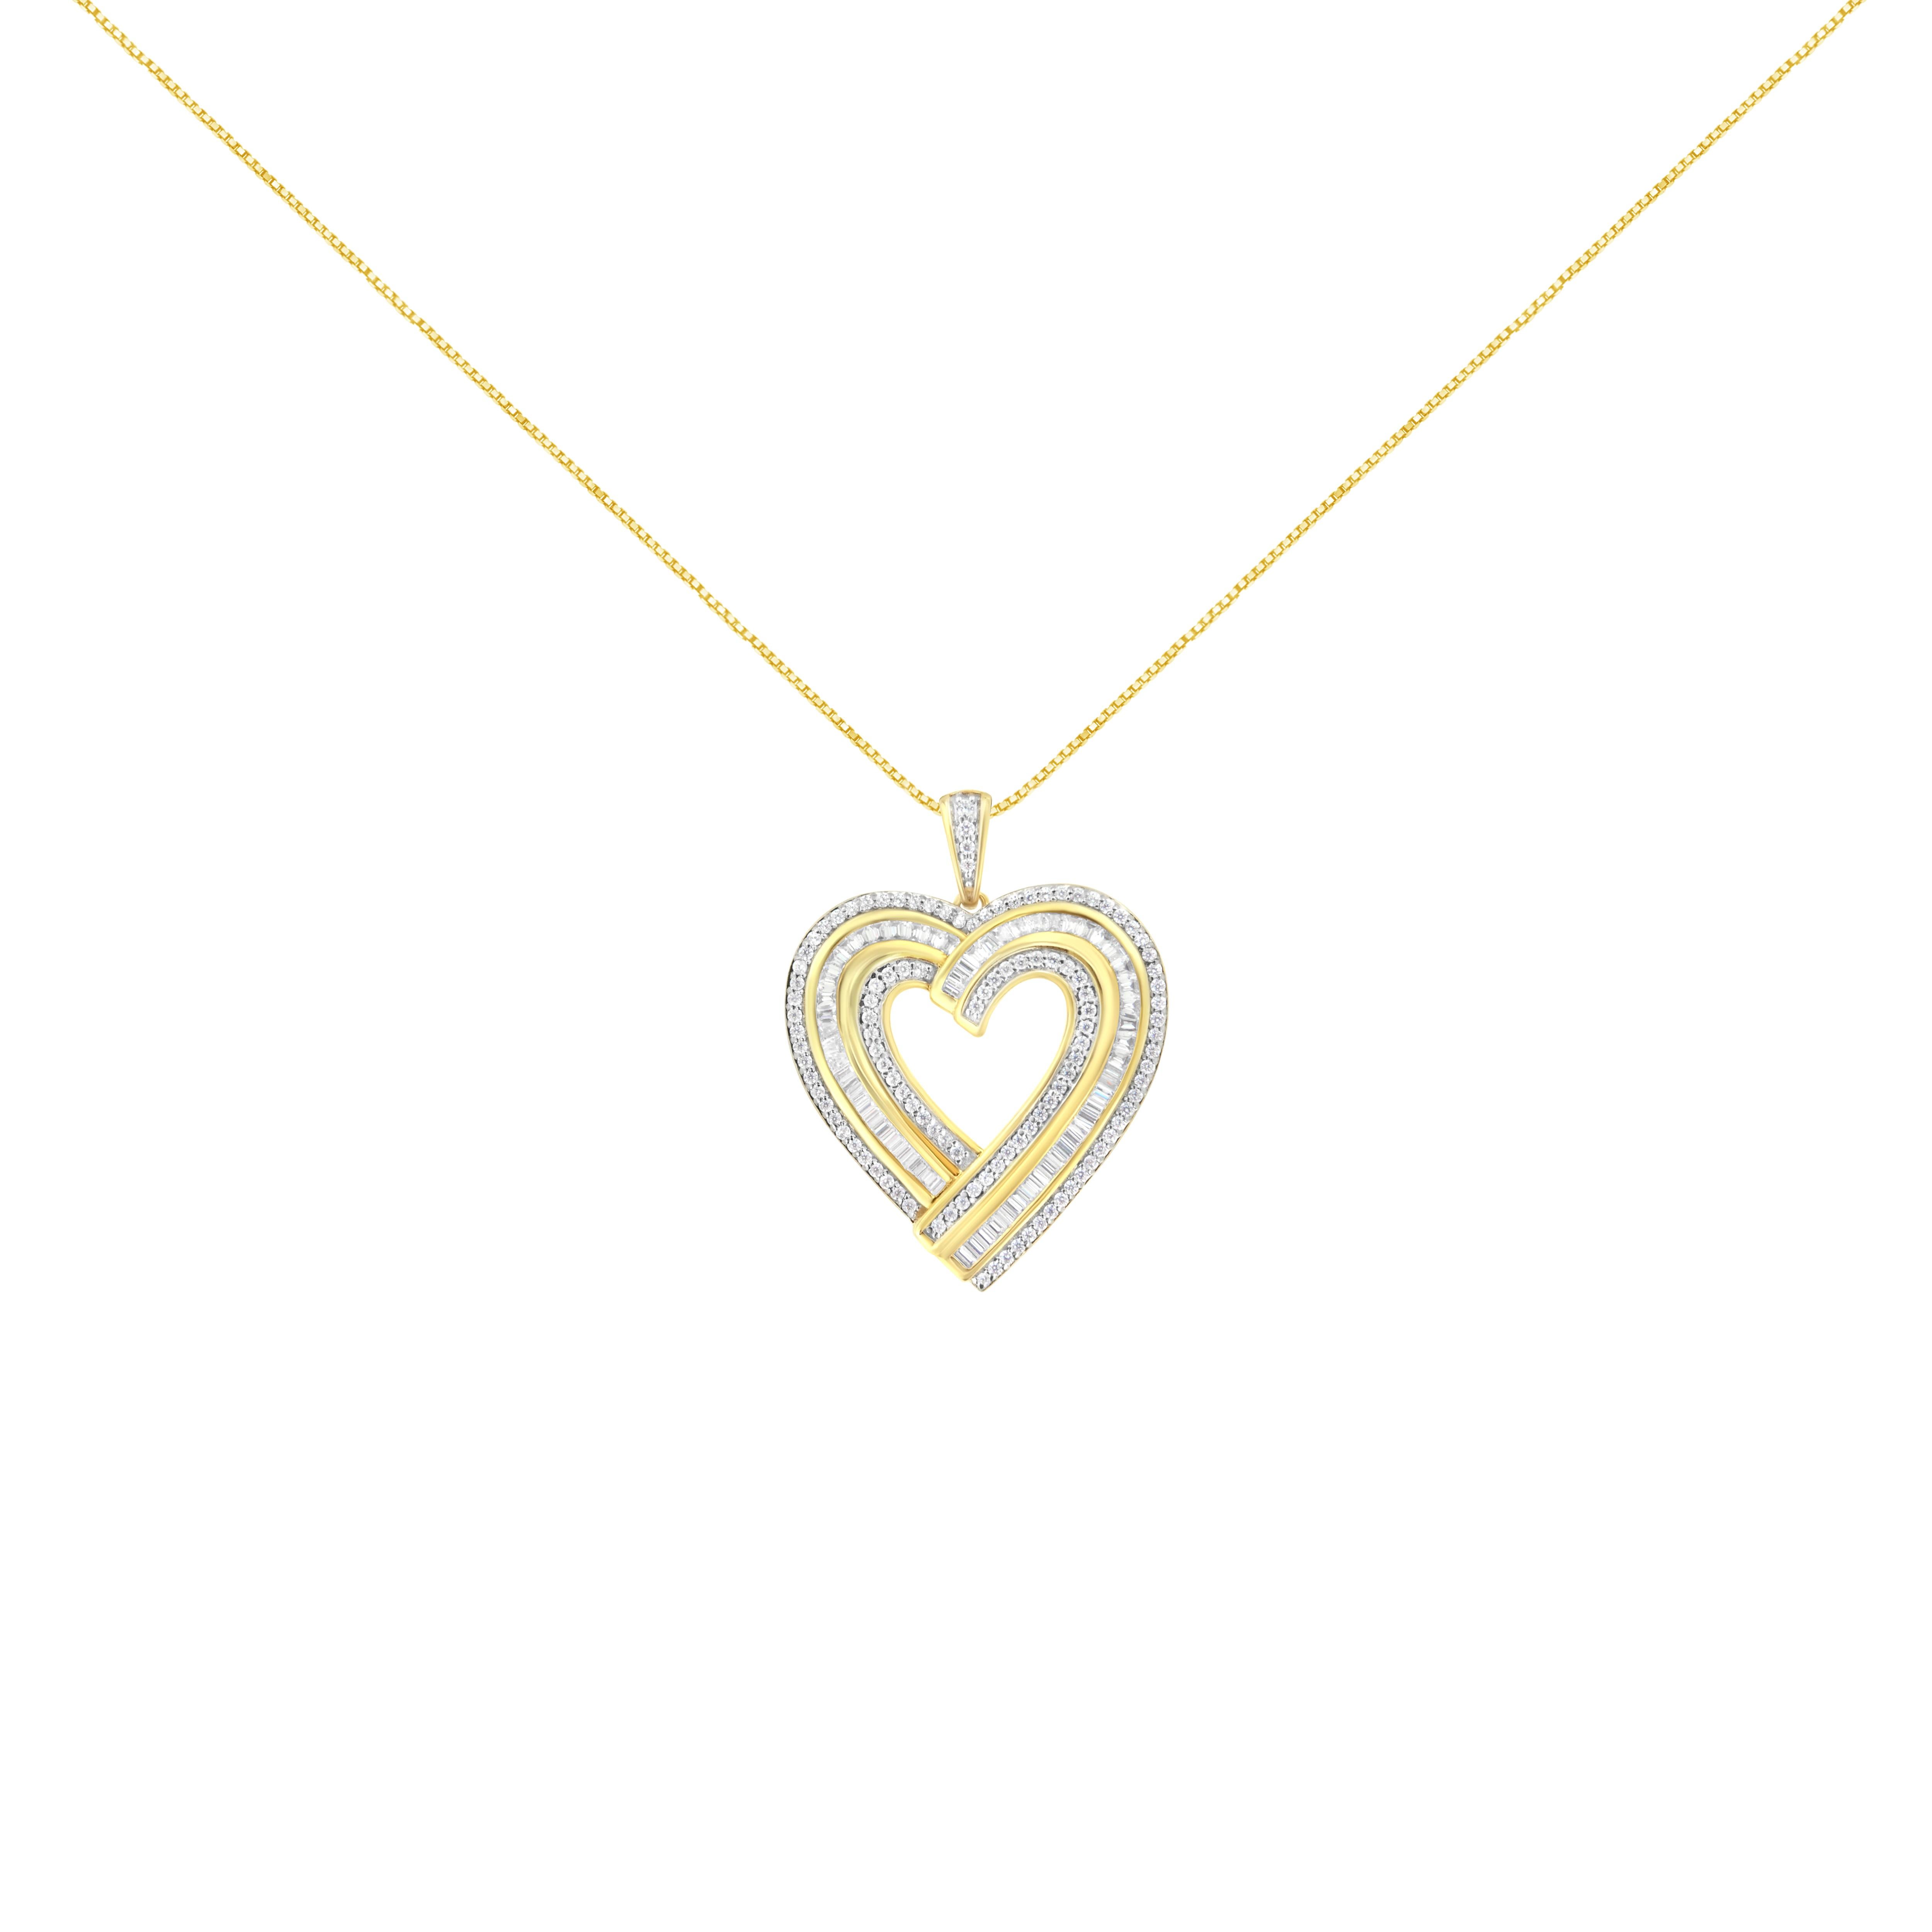 A glamourous twist on a classic design, this heart pendant has an impressive total carat weight of 1 3/8 c.t. The composite design is embellished with natural, baguette-cut diamonds. The stones are set in genuine .925 sterling silver, plated with